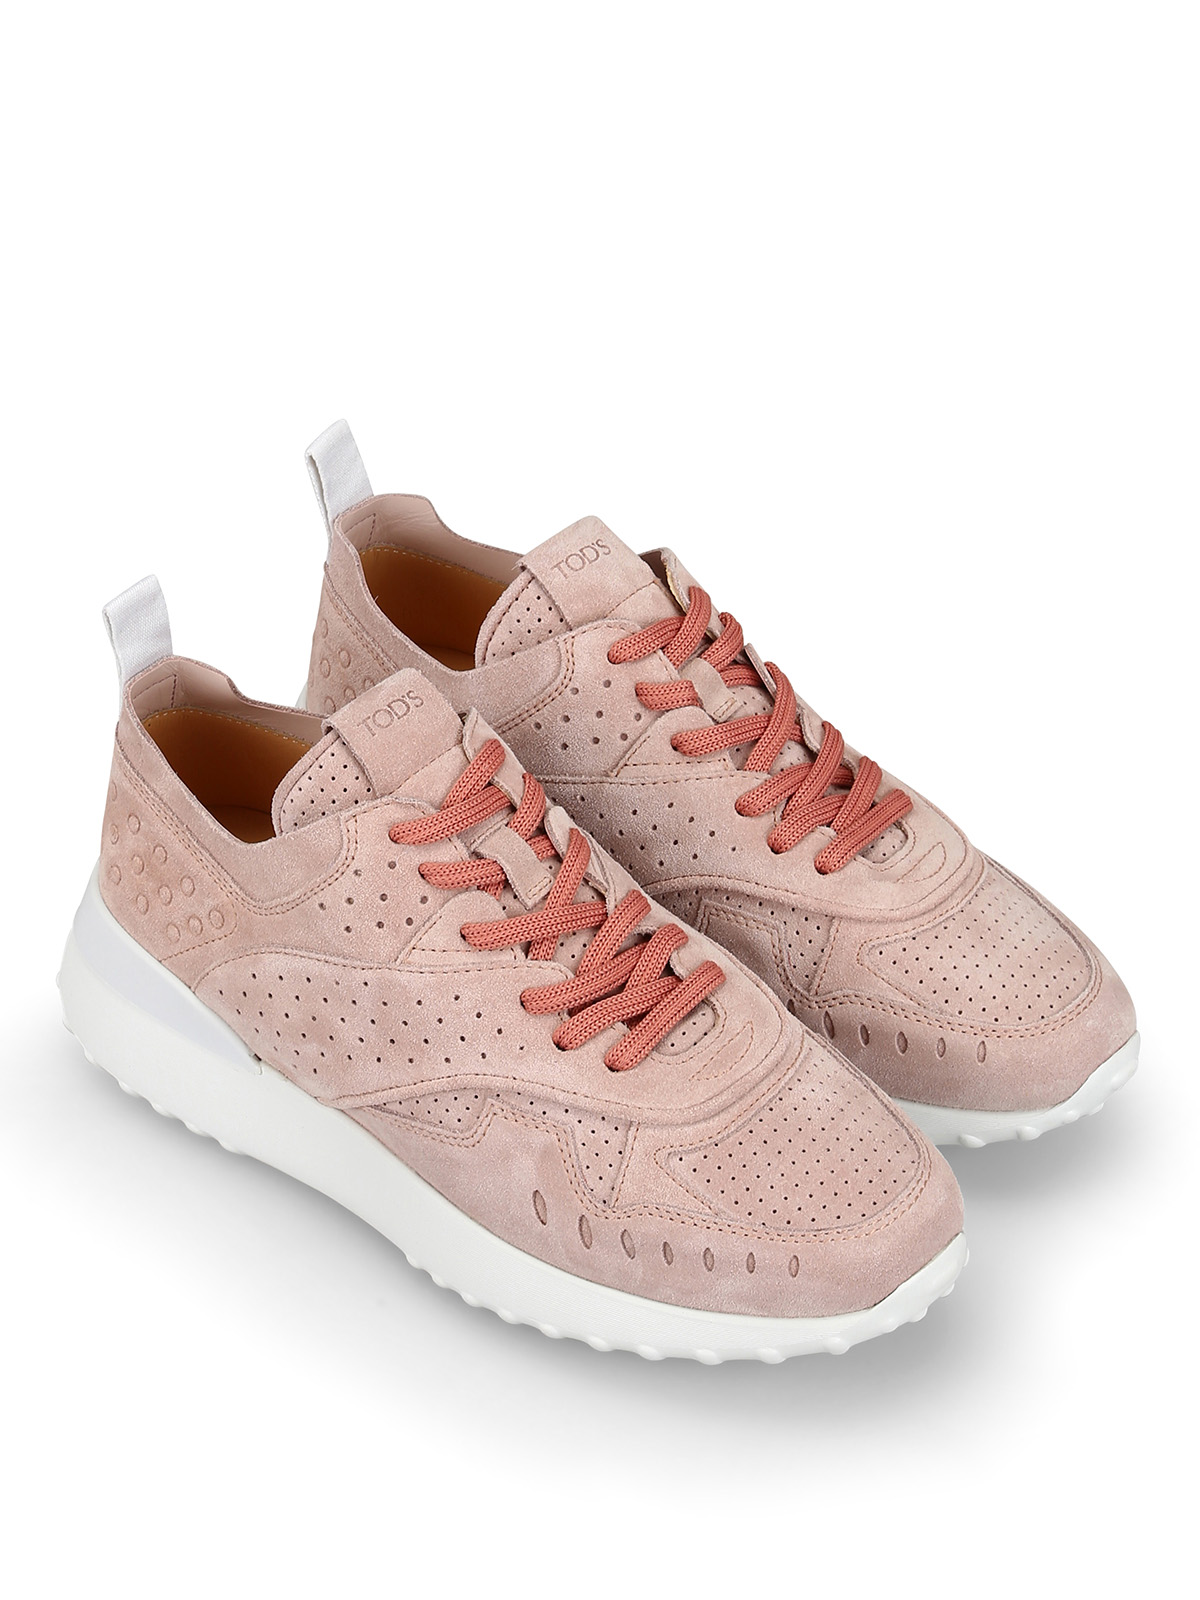 powder pink trainers